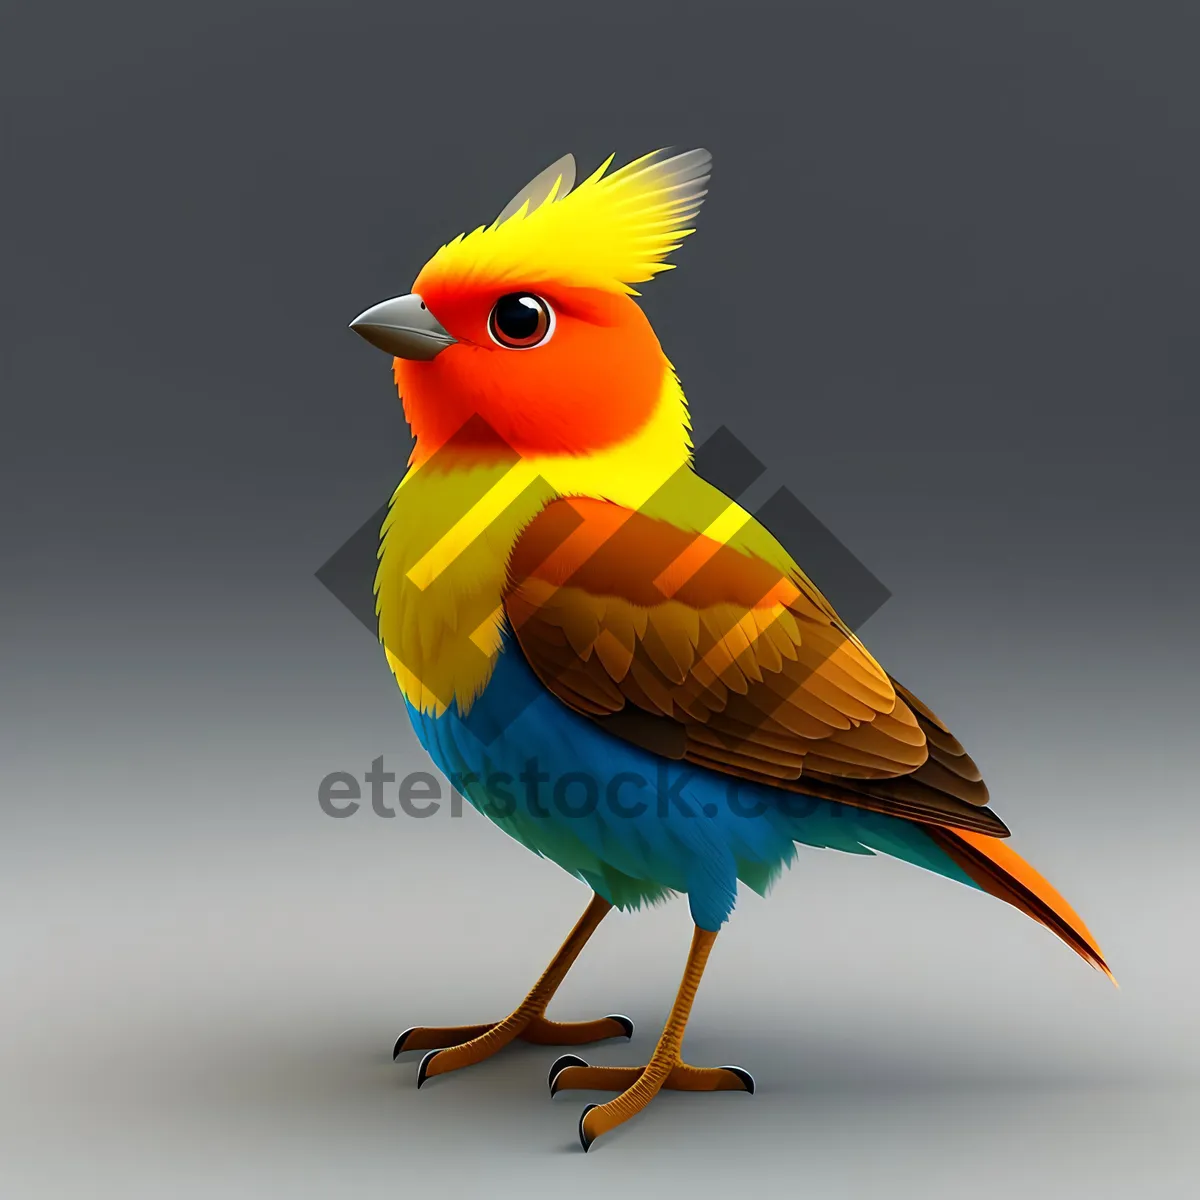 Picture of Cute Yellow Feathered Bird in Studio